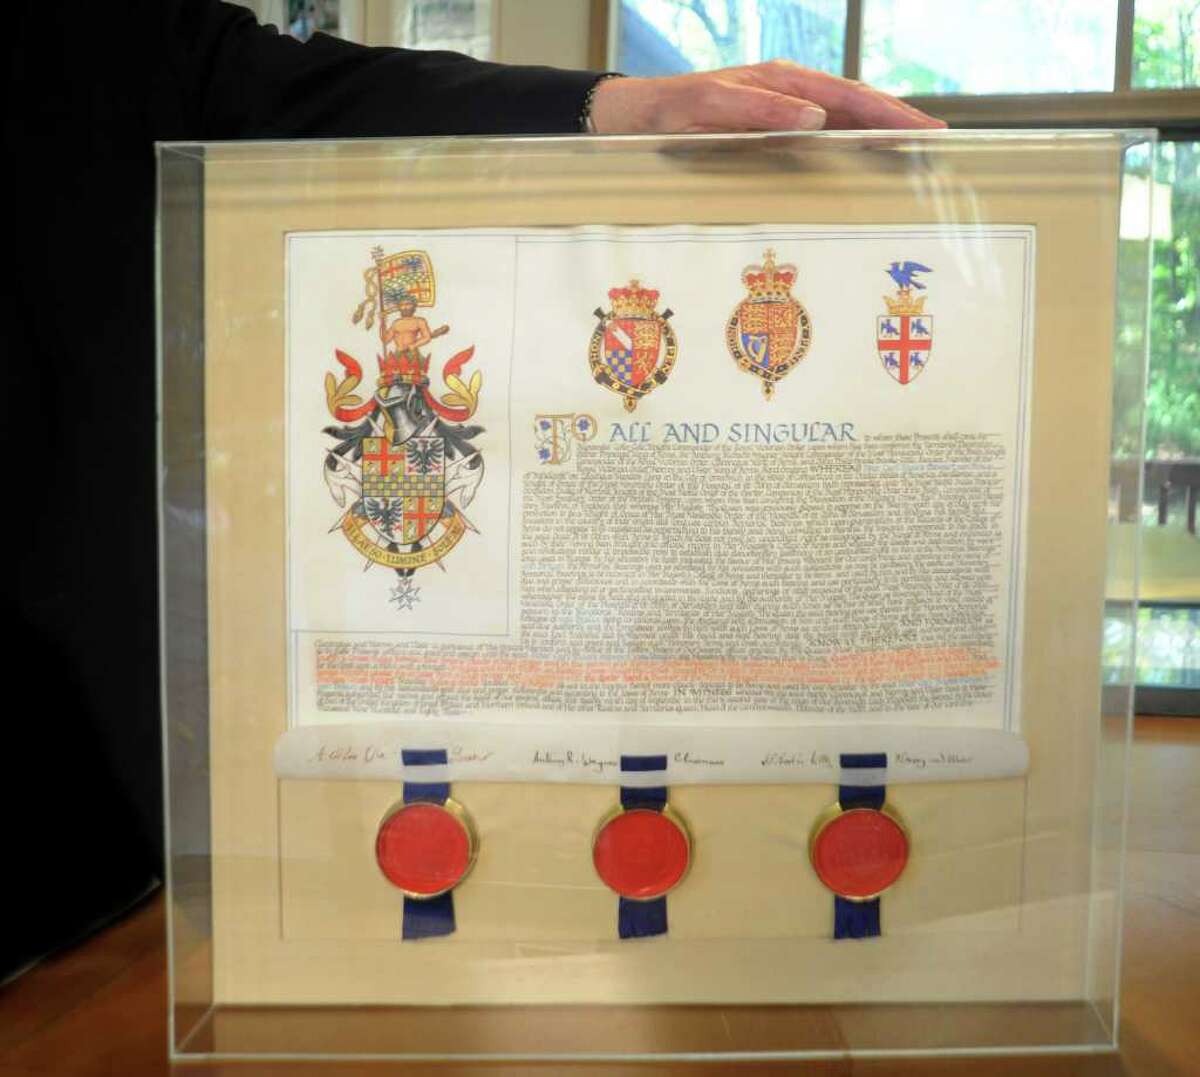 Peter von Braun, a Republican candidate for Board of Education displays material Tuesday, Nov. 1, 2011, shows he received an honorary knighthood from Queen Elizabeth II.